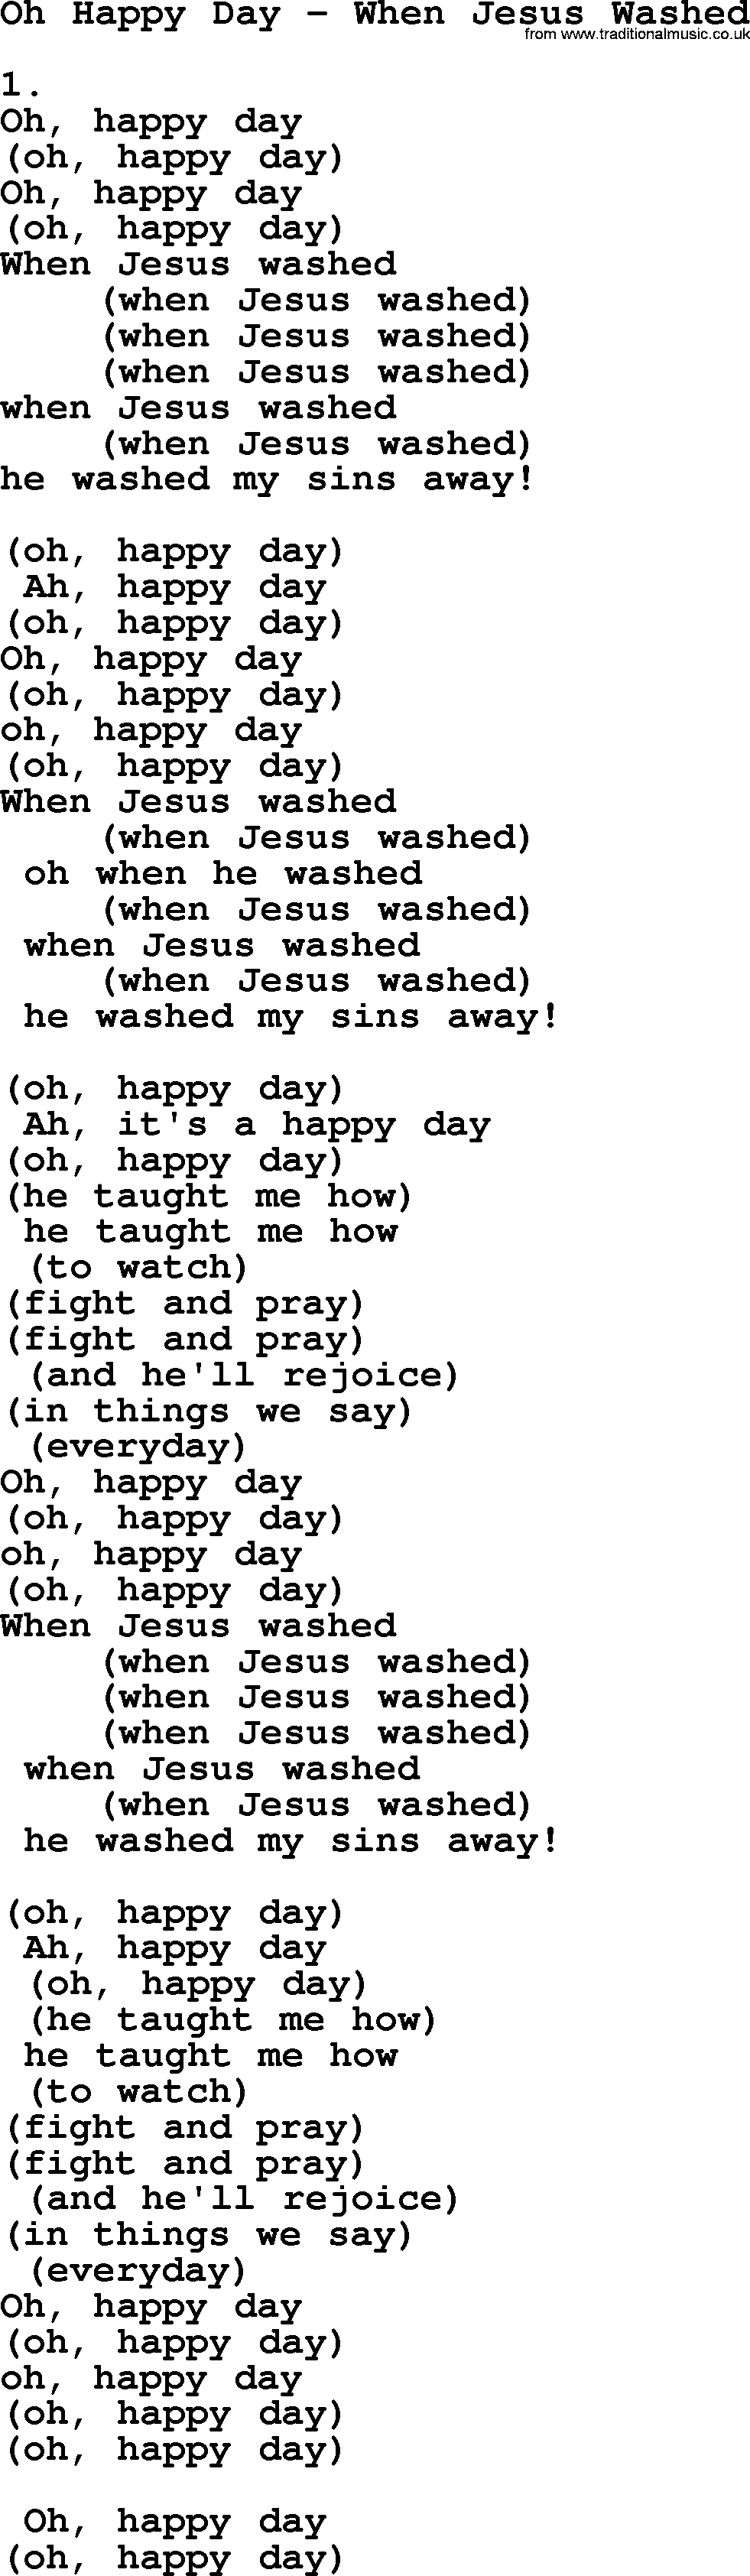 Apostolic & Pentecostal Hymns and Songs, Hymn: Oh Happy Day - When Jesus Washed lyrics and PDF